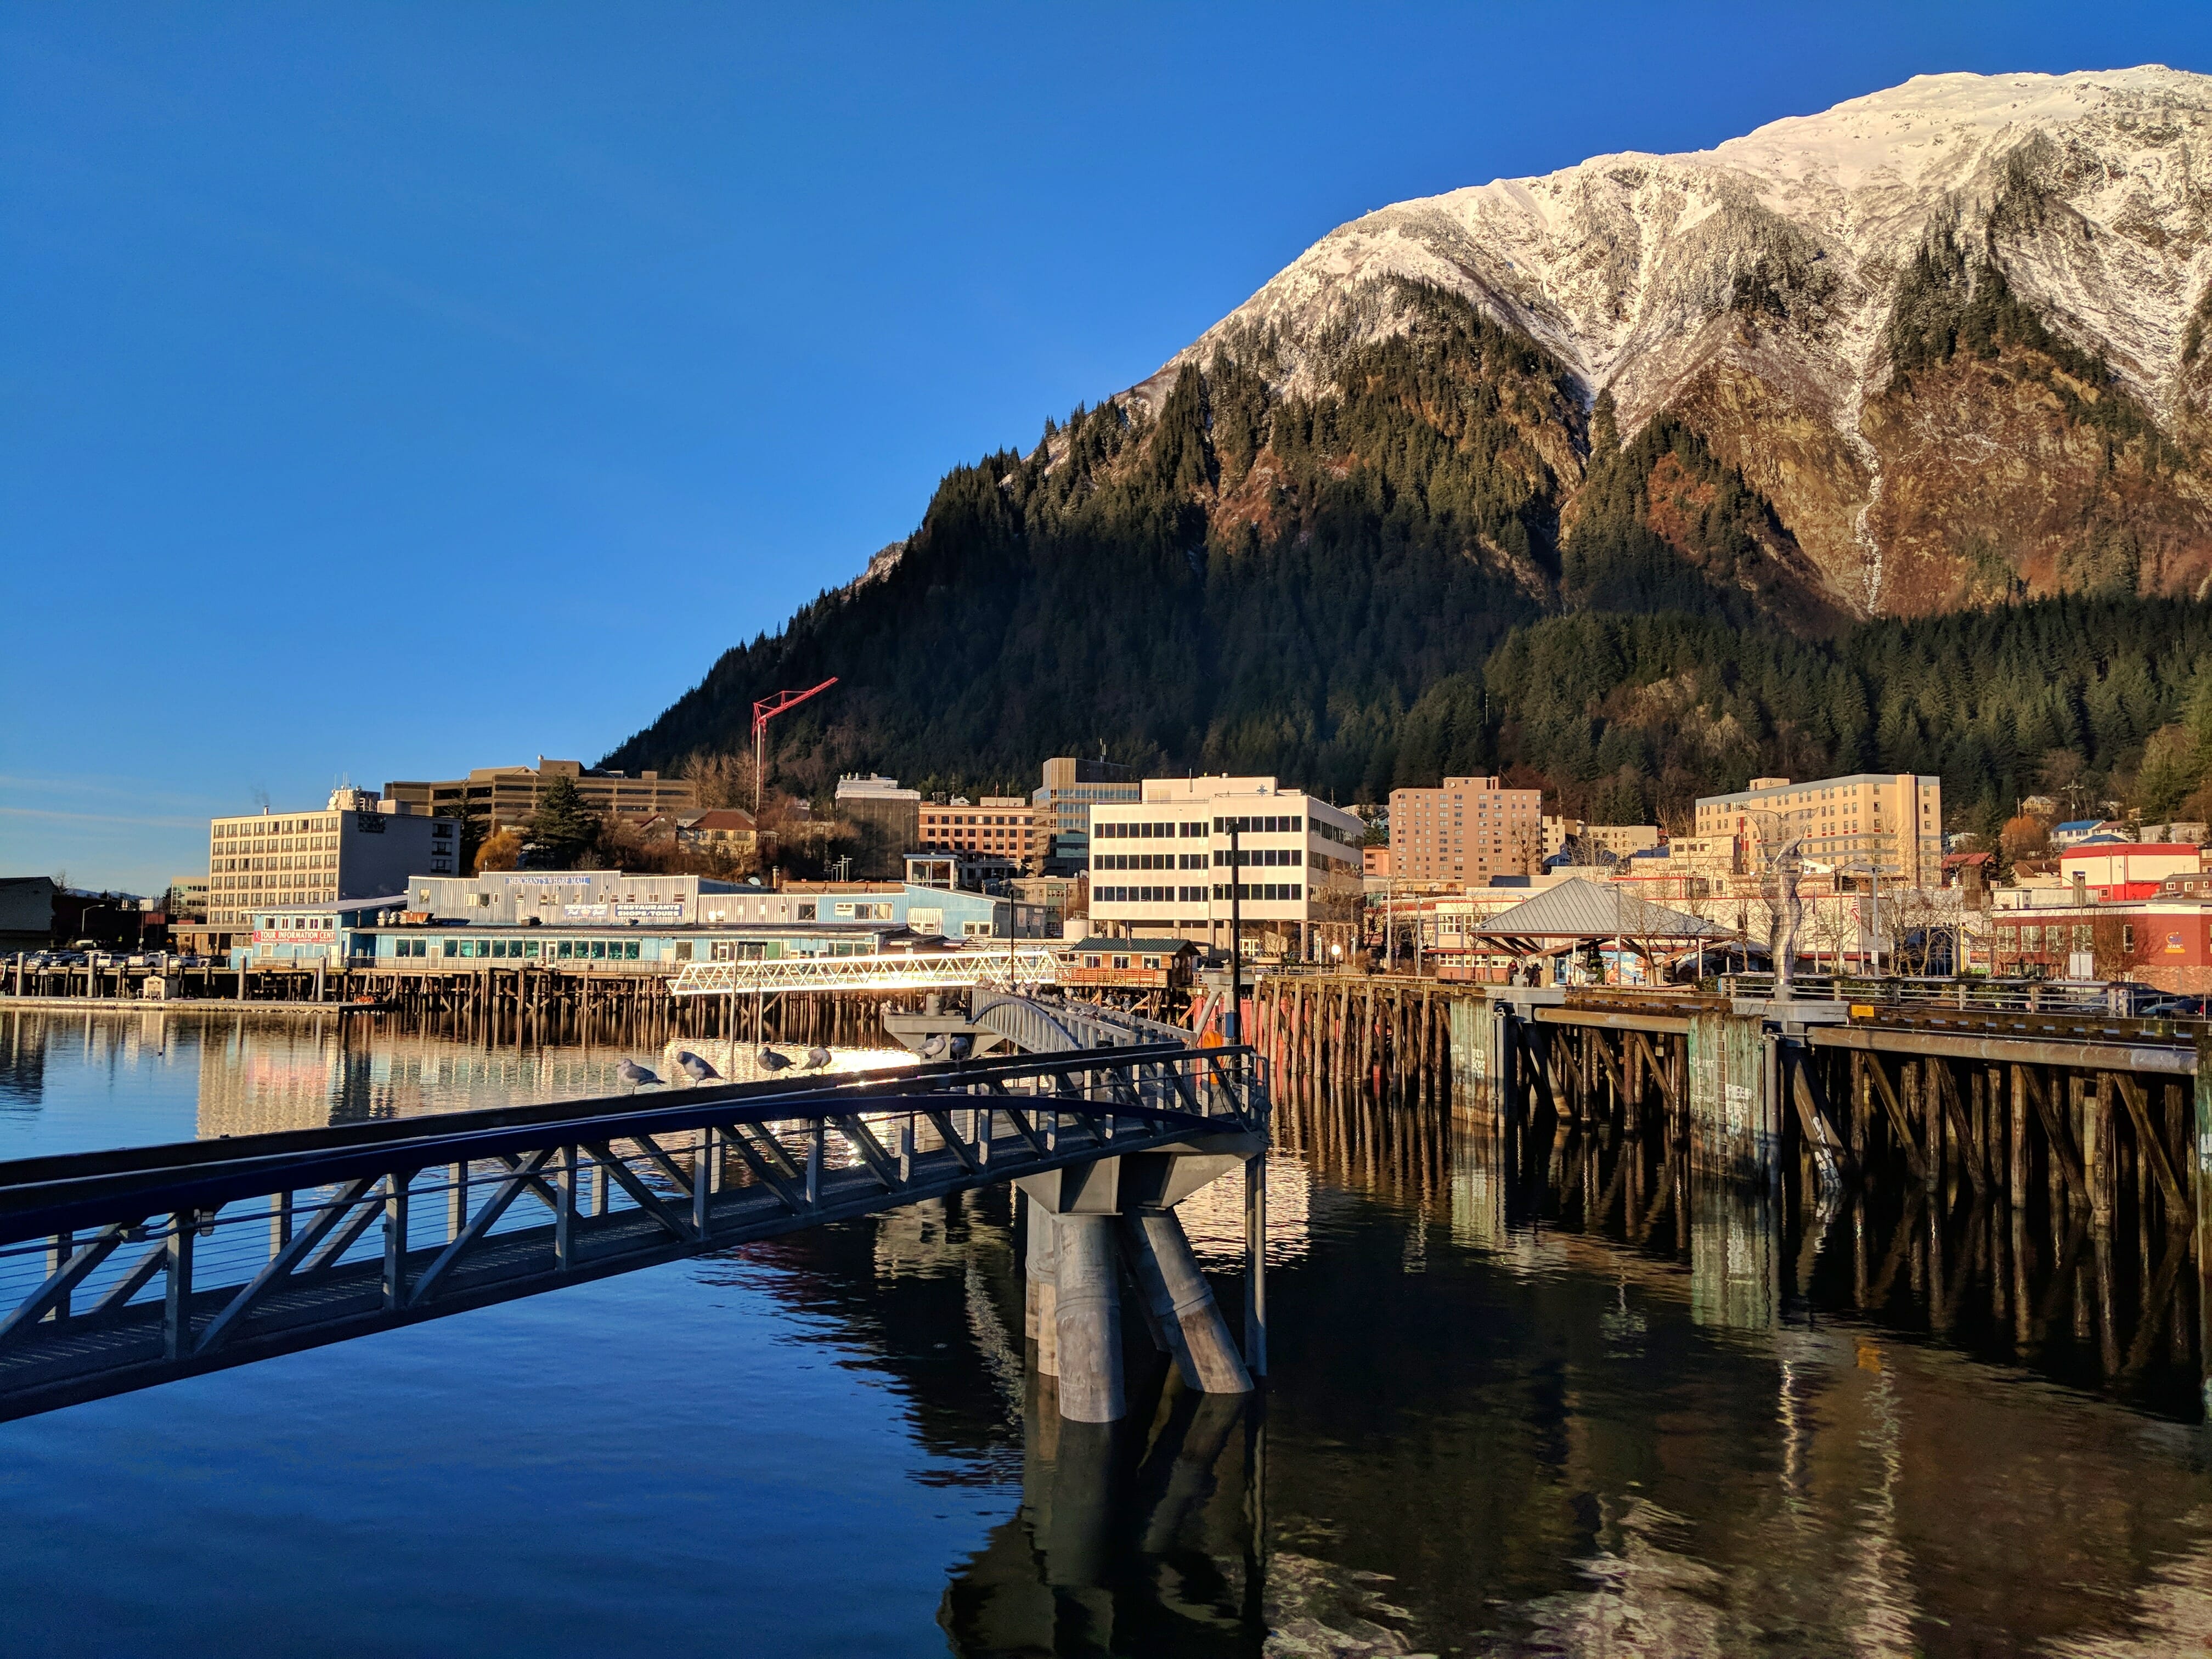 View of the Marine Park and downtown Juneau from the cruise ship pier.